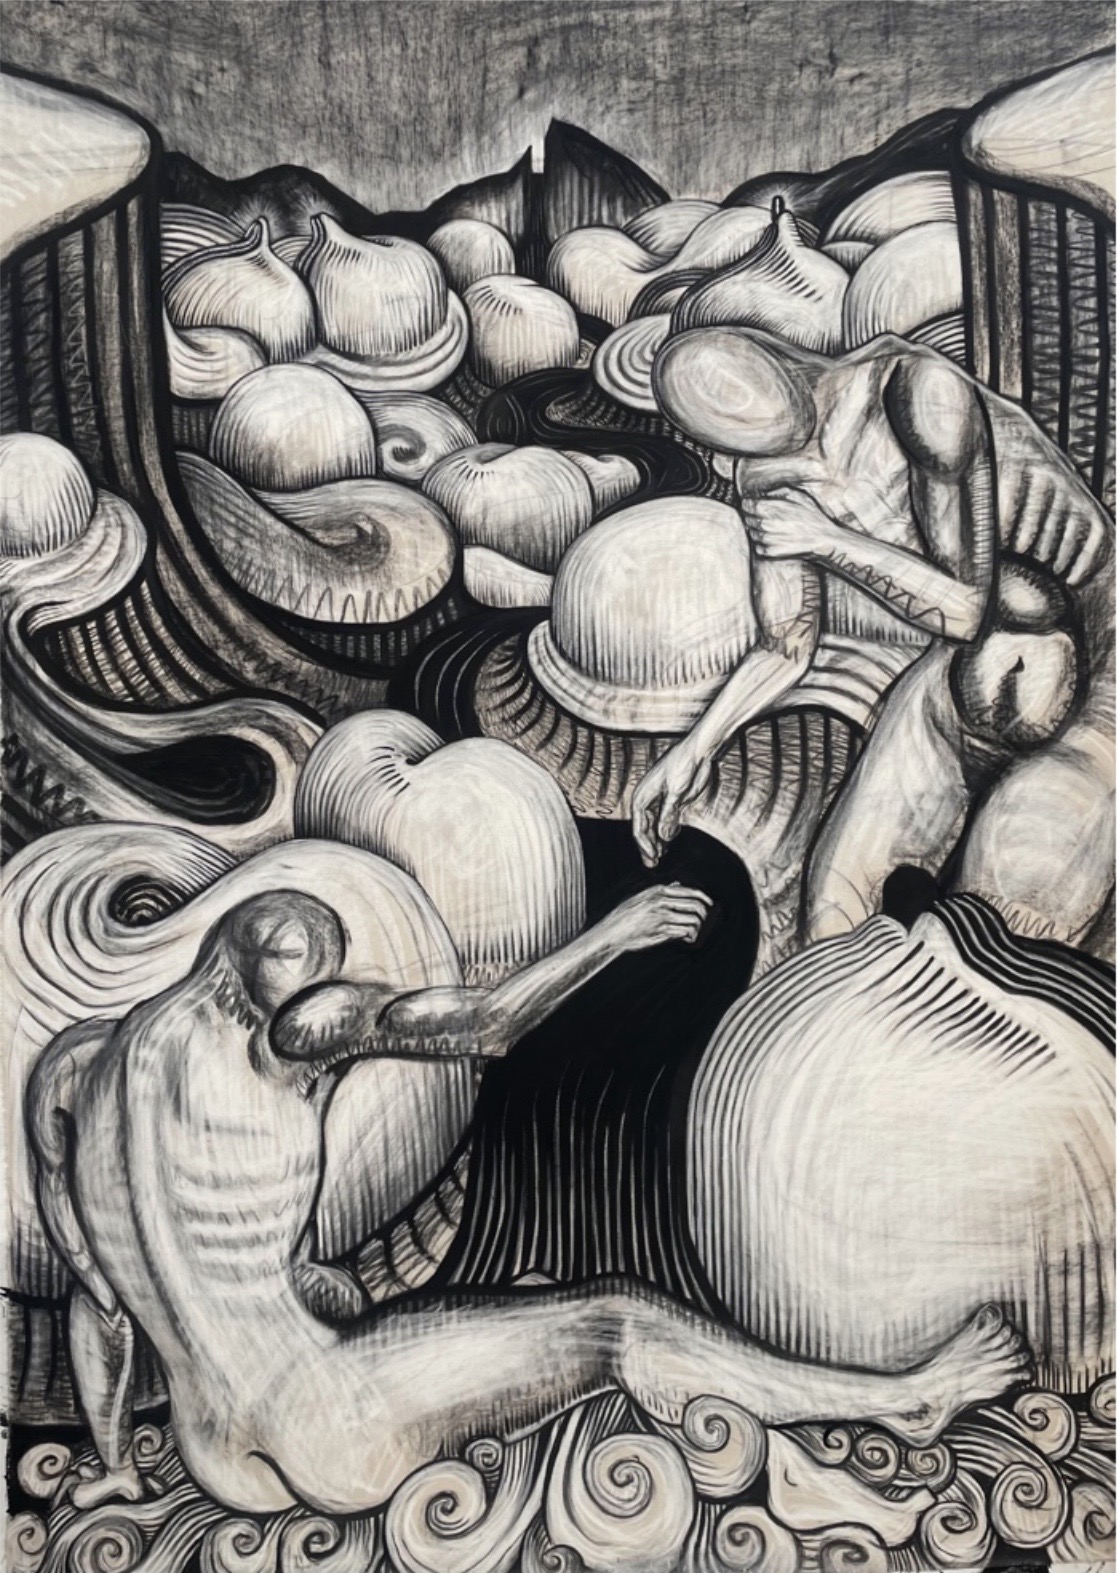 A large-scale monochromatic drawing of two figures and a river.